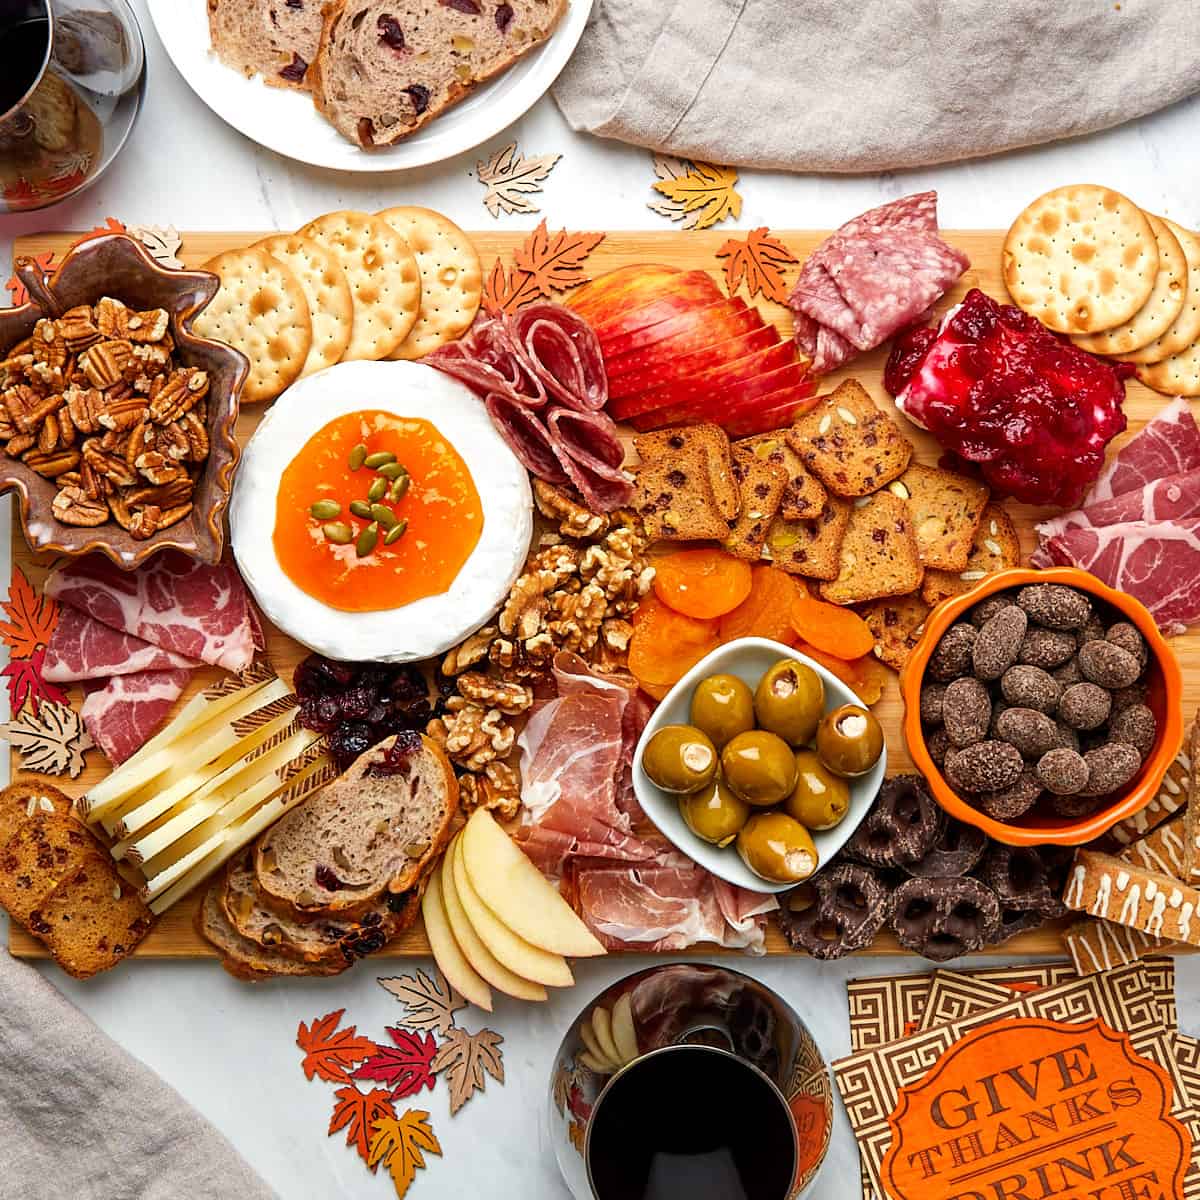 charcuterie board assembled on wood board served with glasses of wine